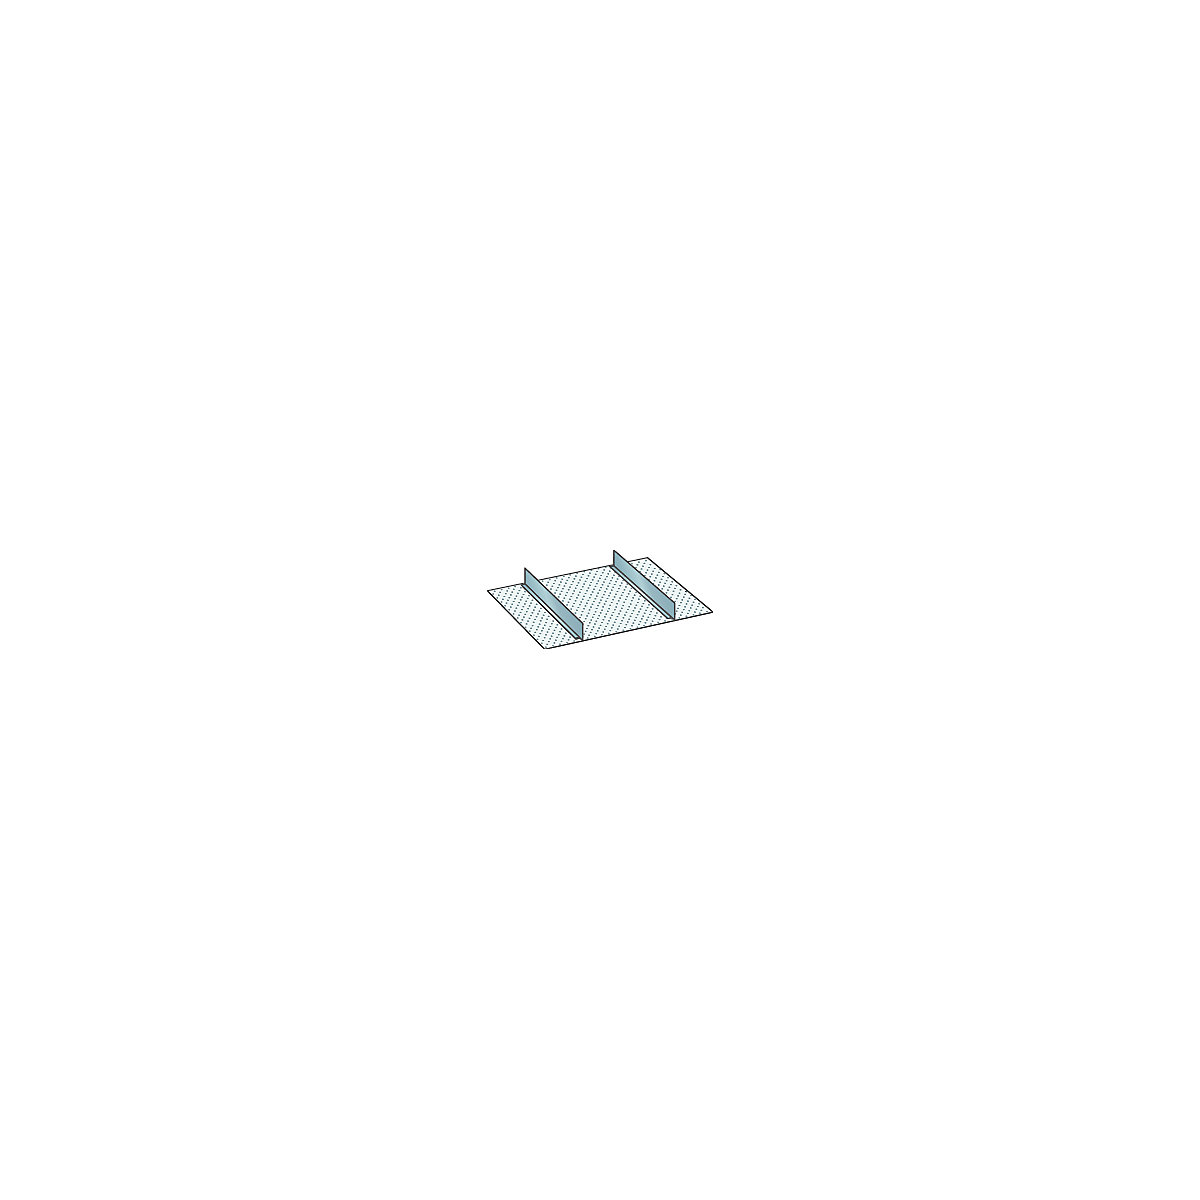 Divider set for drawer dimensions 459 x 459 mm – LISTA, aluminium, 2 dividers, front height 150 mm-1